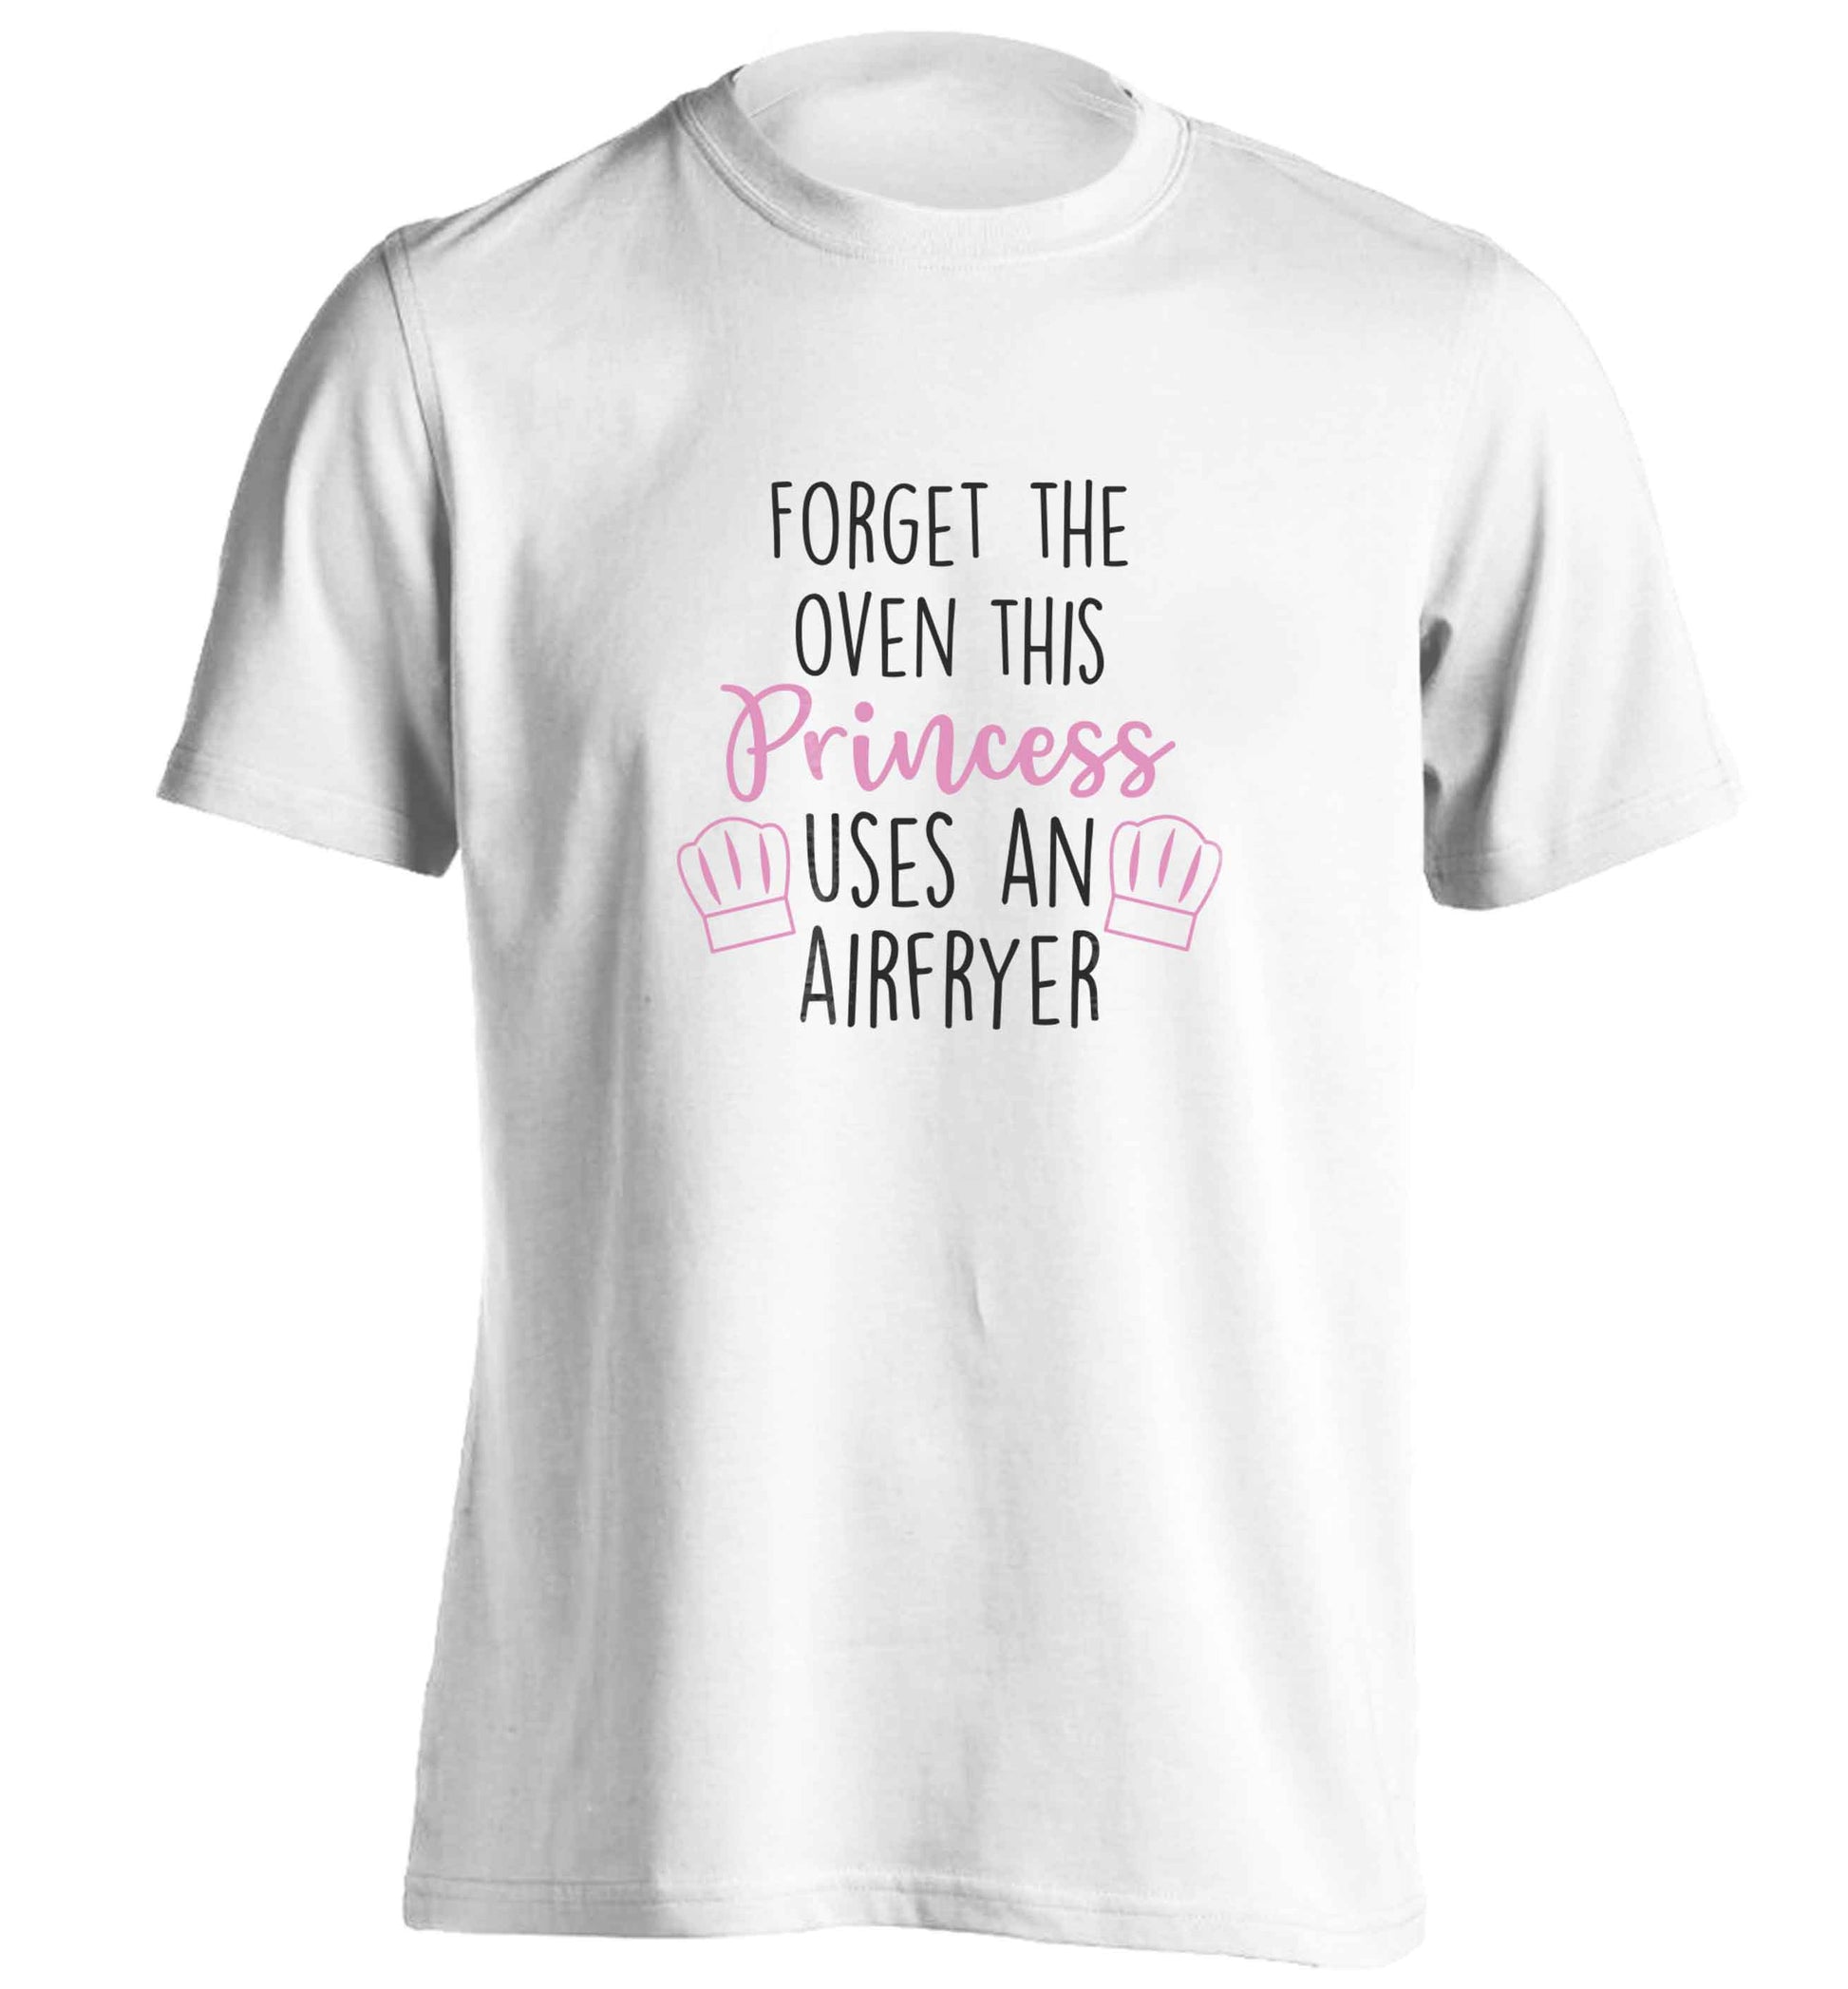 Forget the oven this princess uses an airfryeradults unisex white Tshirt 2XL